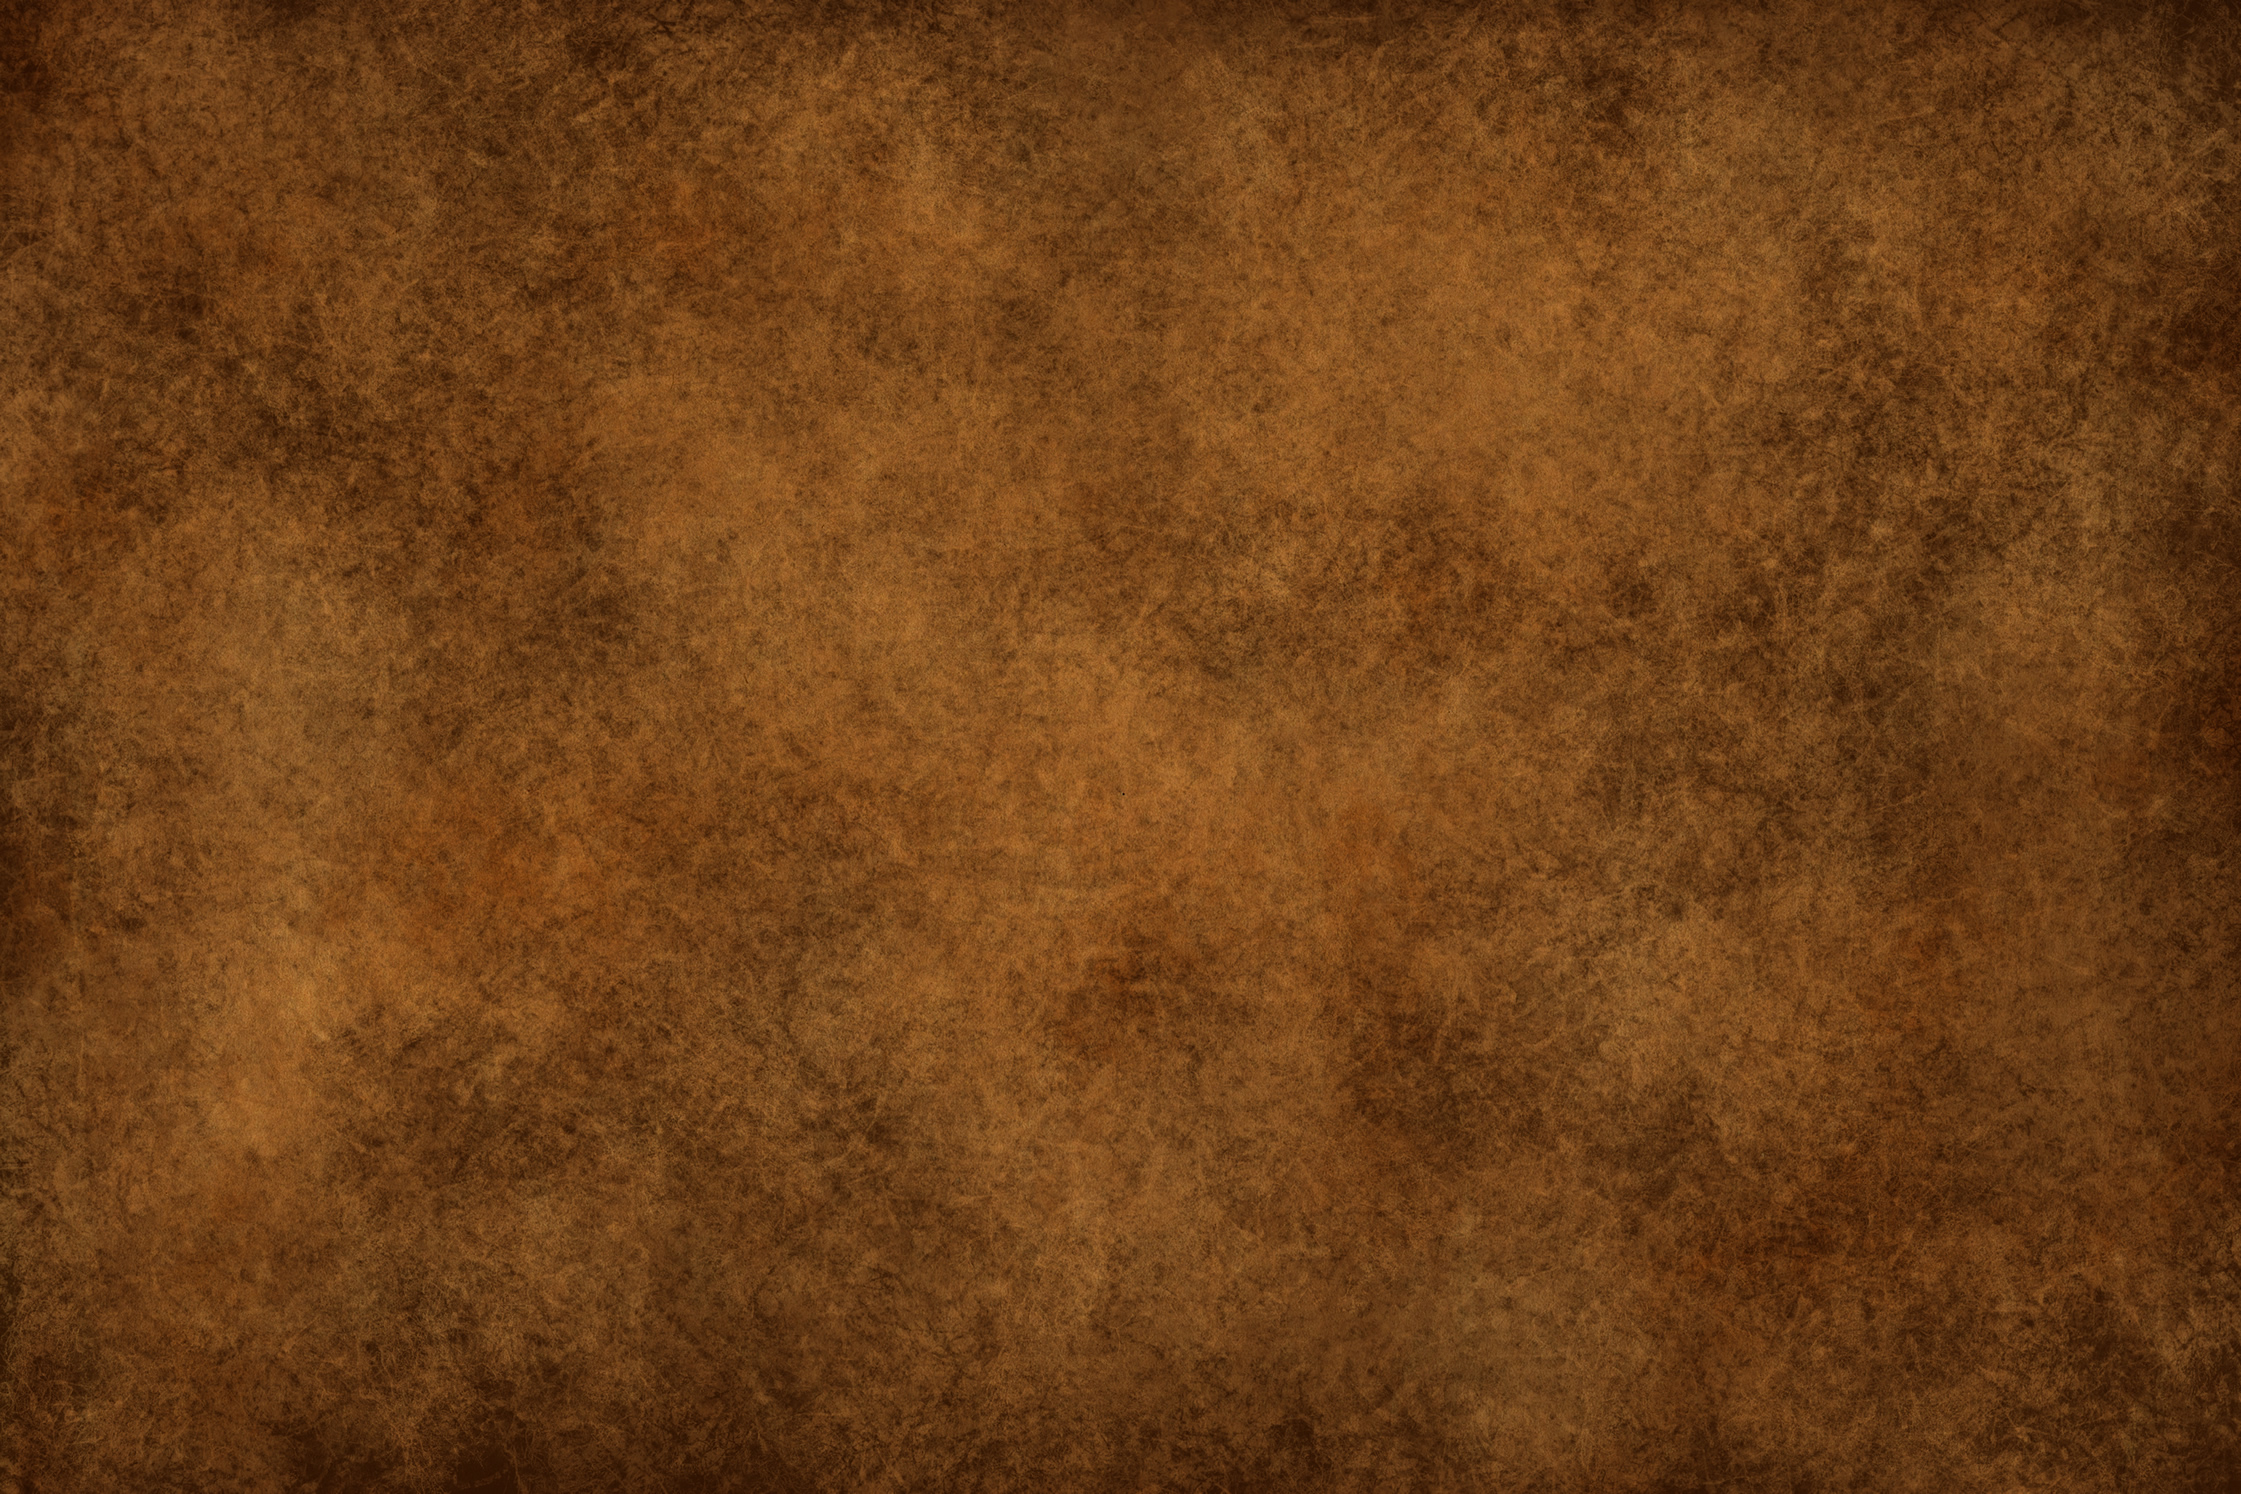 brown wallpaper texture,brown,fur,textile,wood,leather